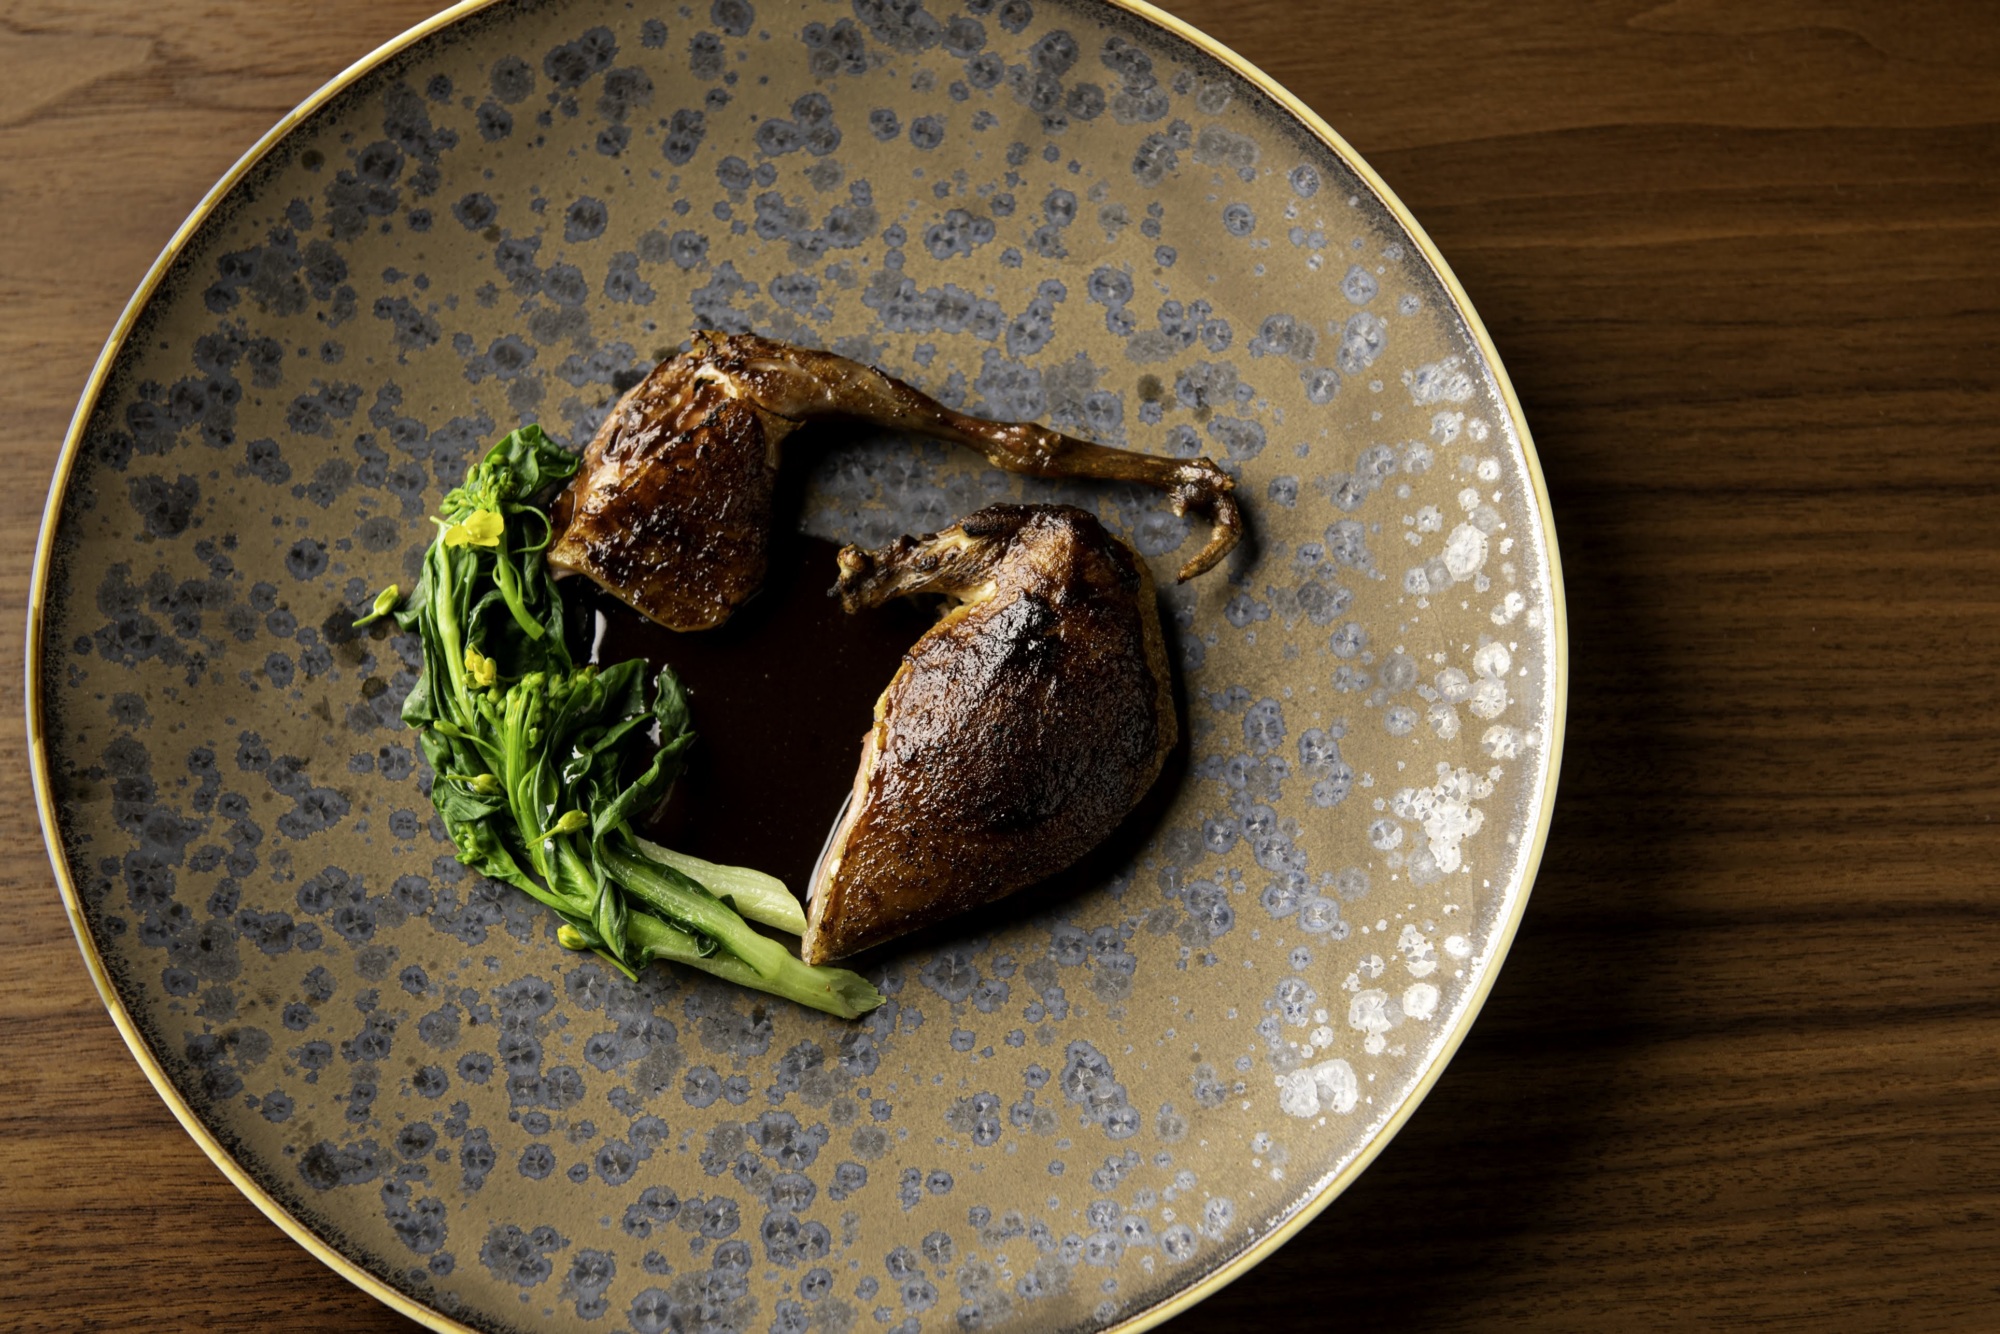 The roasted squab dish features a red miso glaze and a sauce inspired by Mexican mole.